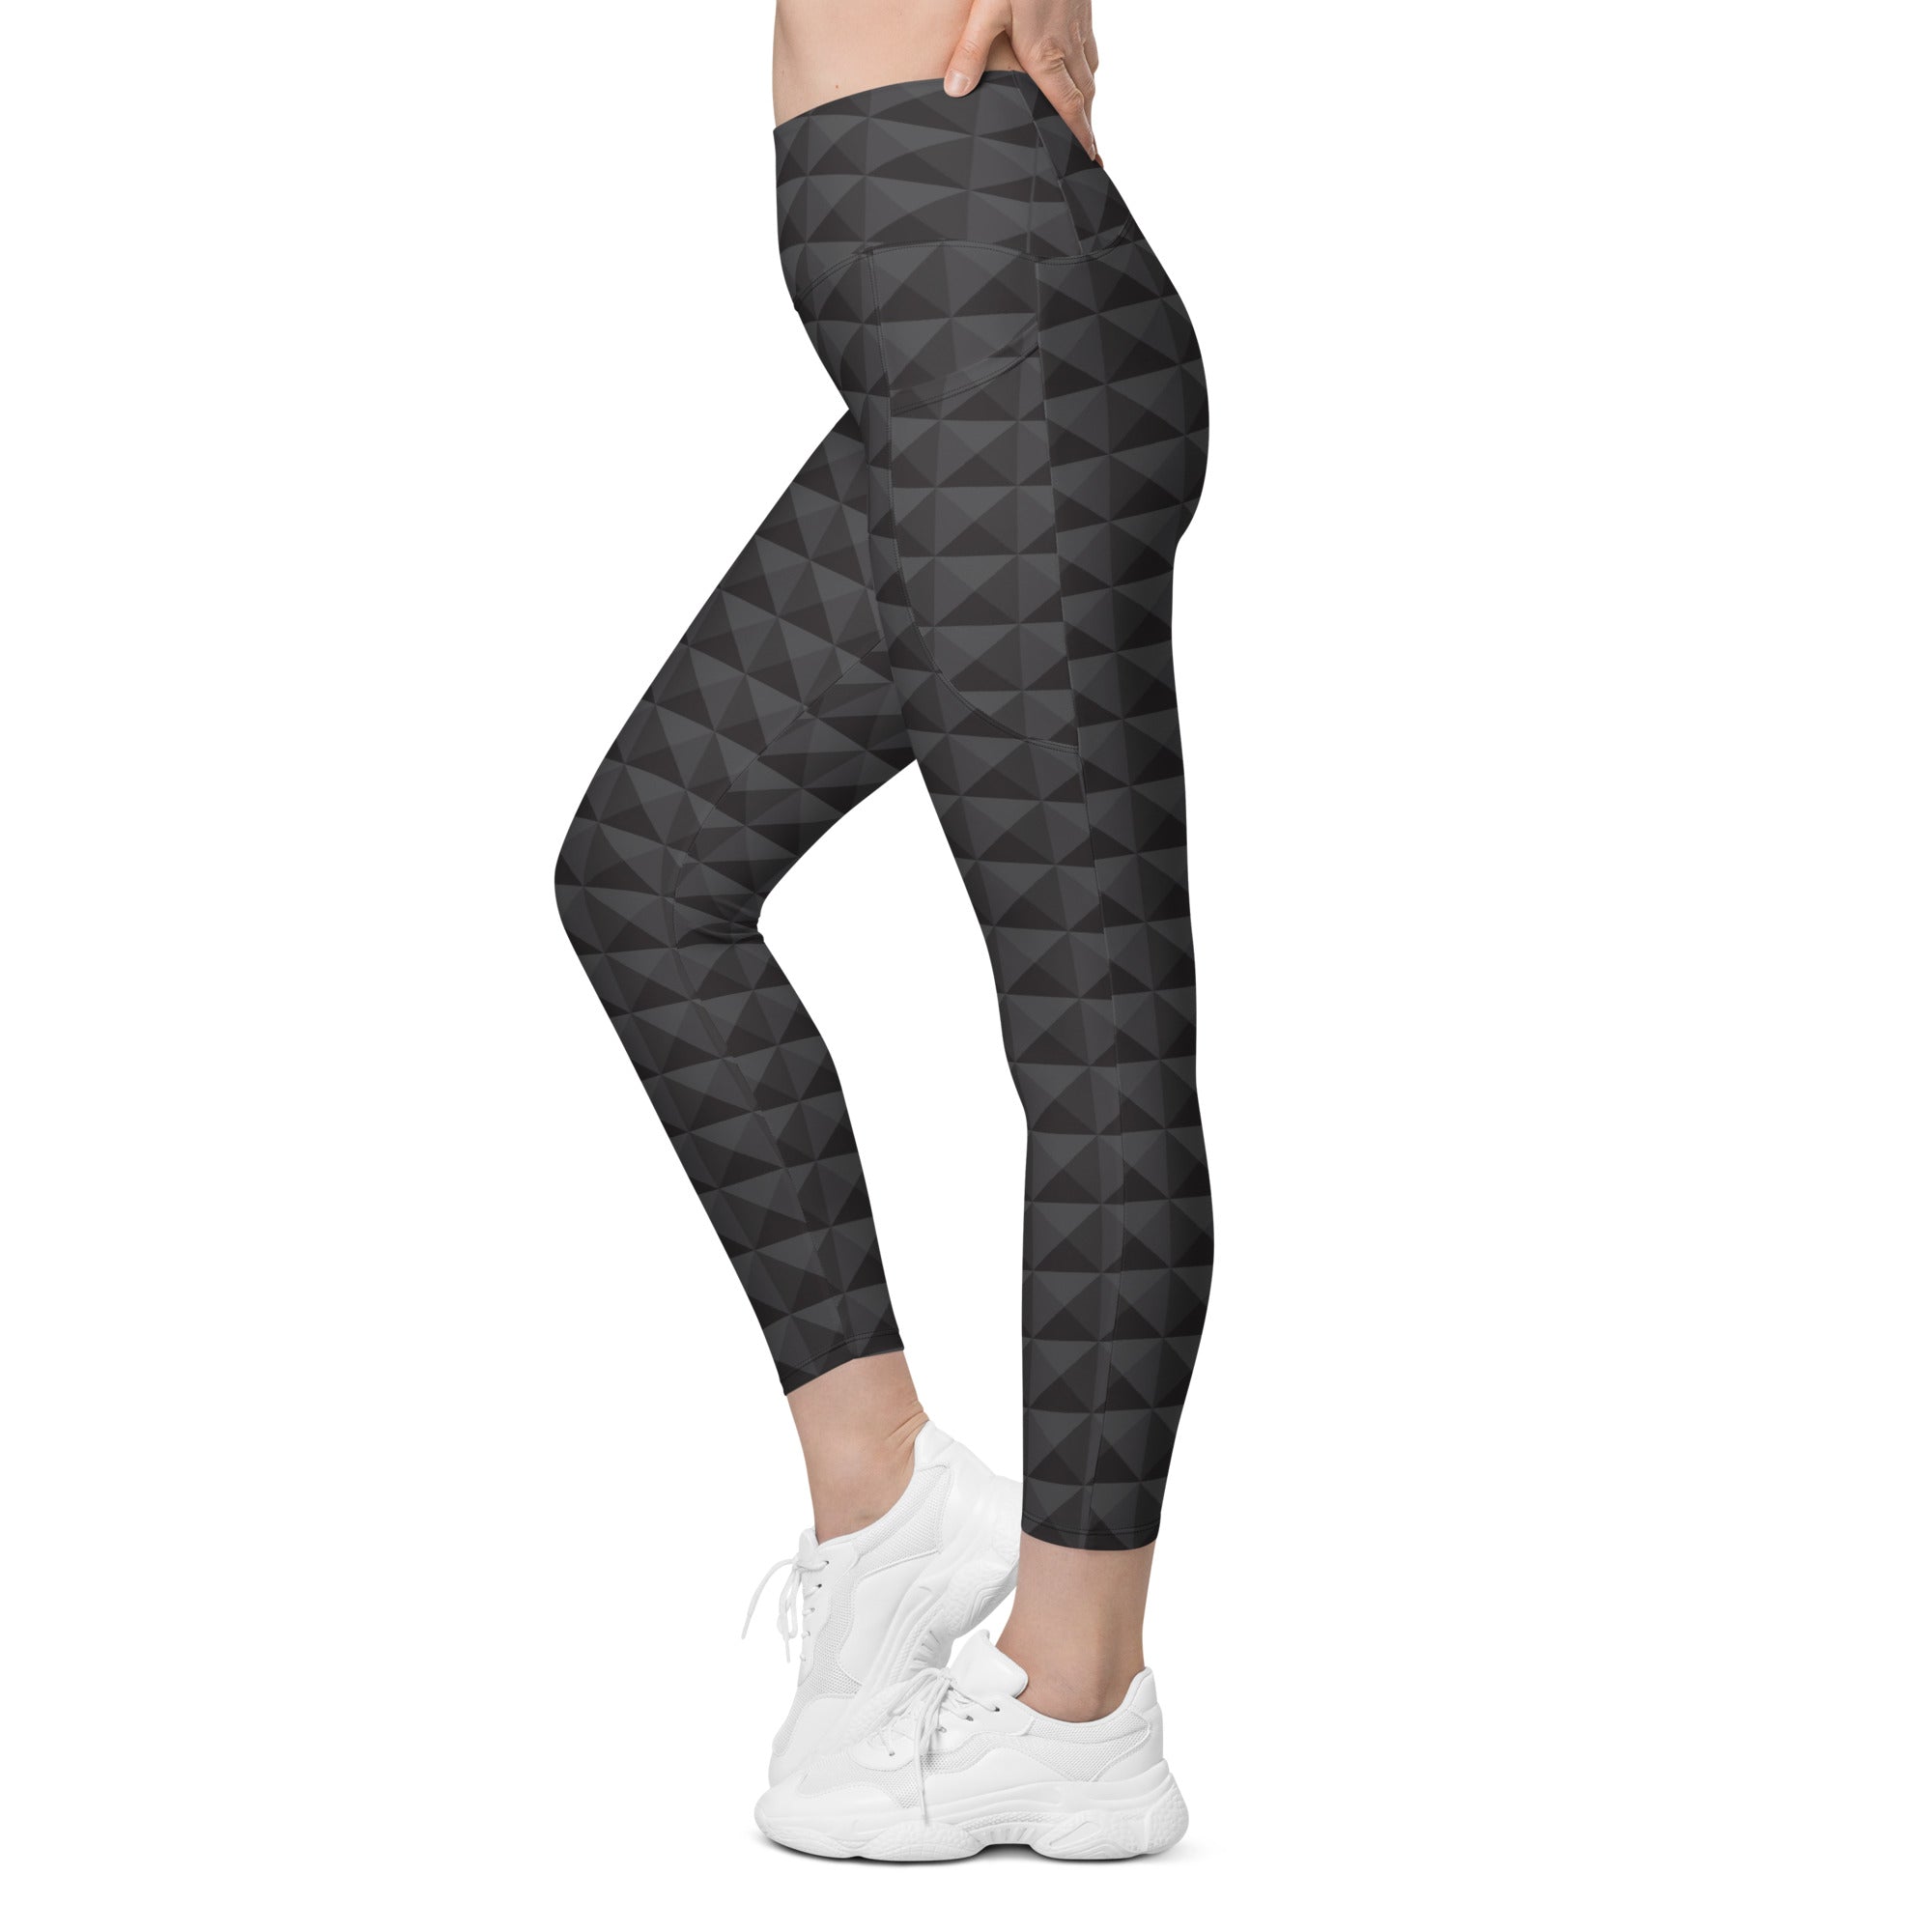 Seamless Cube Pattern Leggings With Pockets